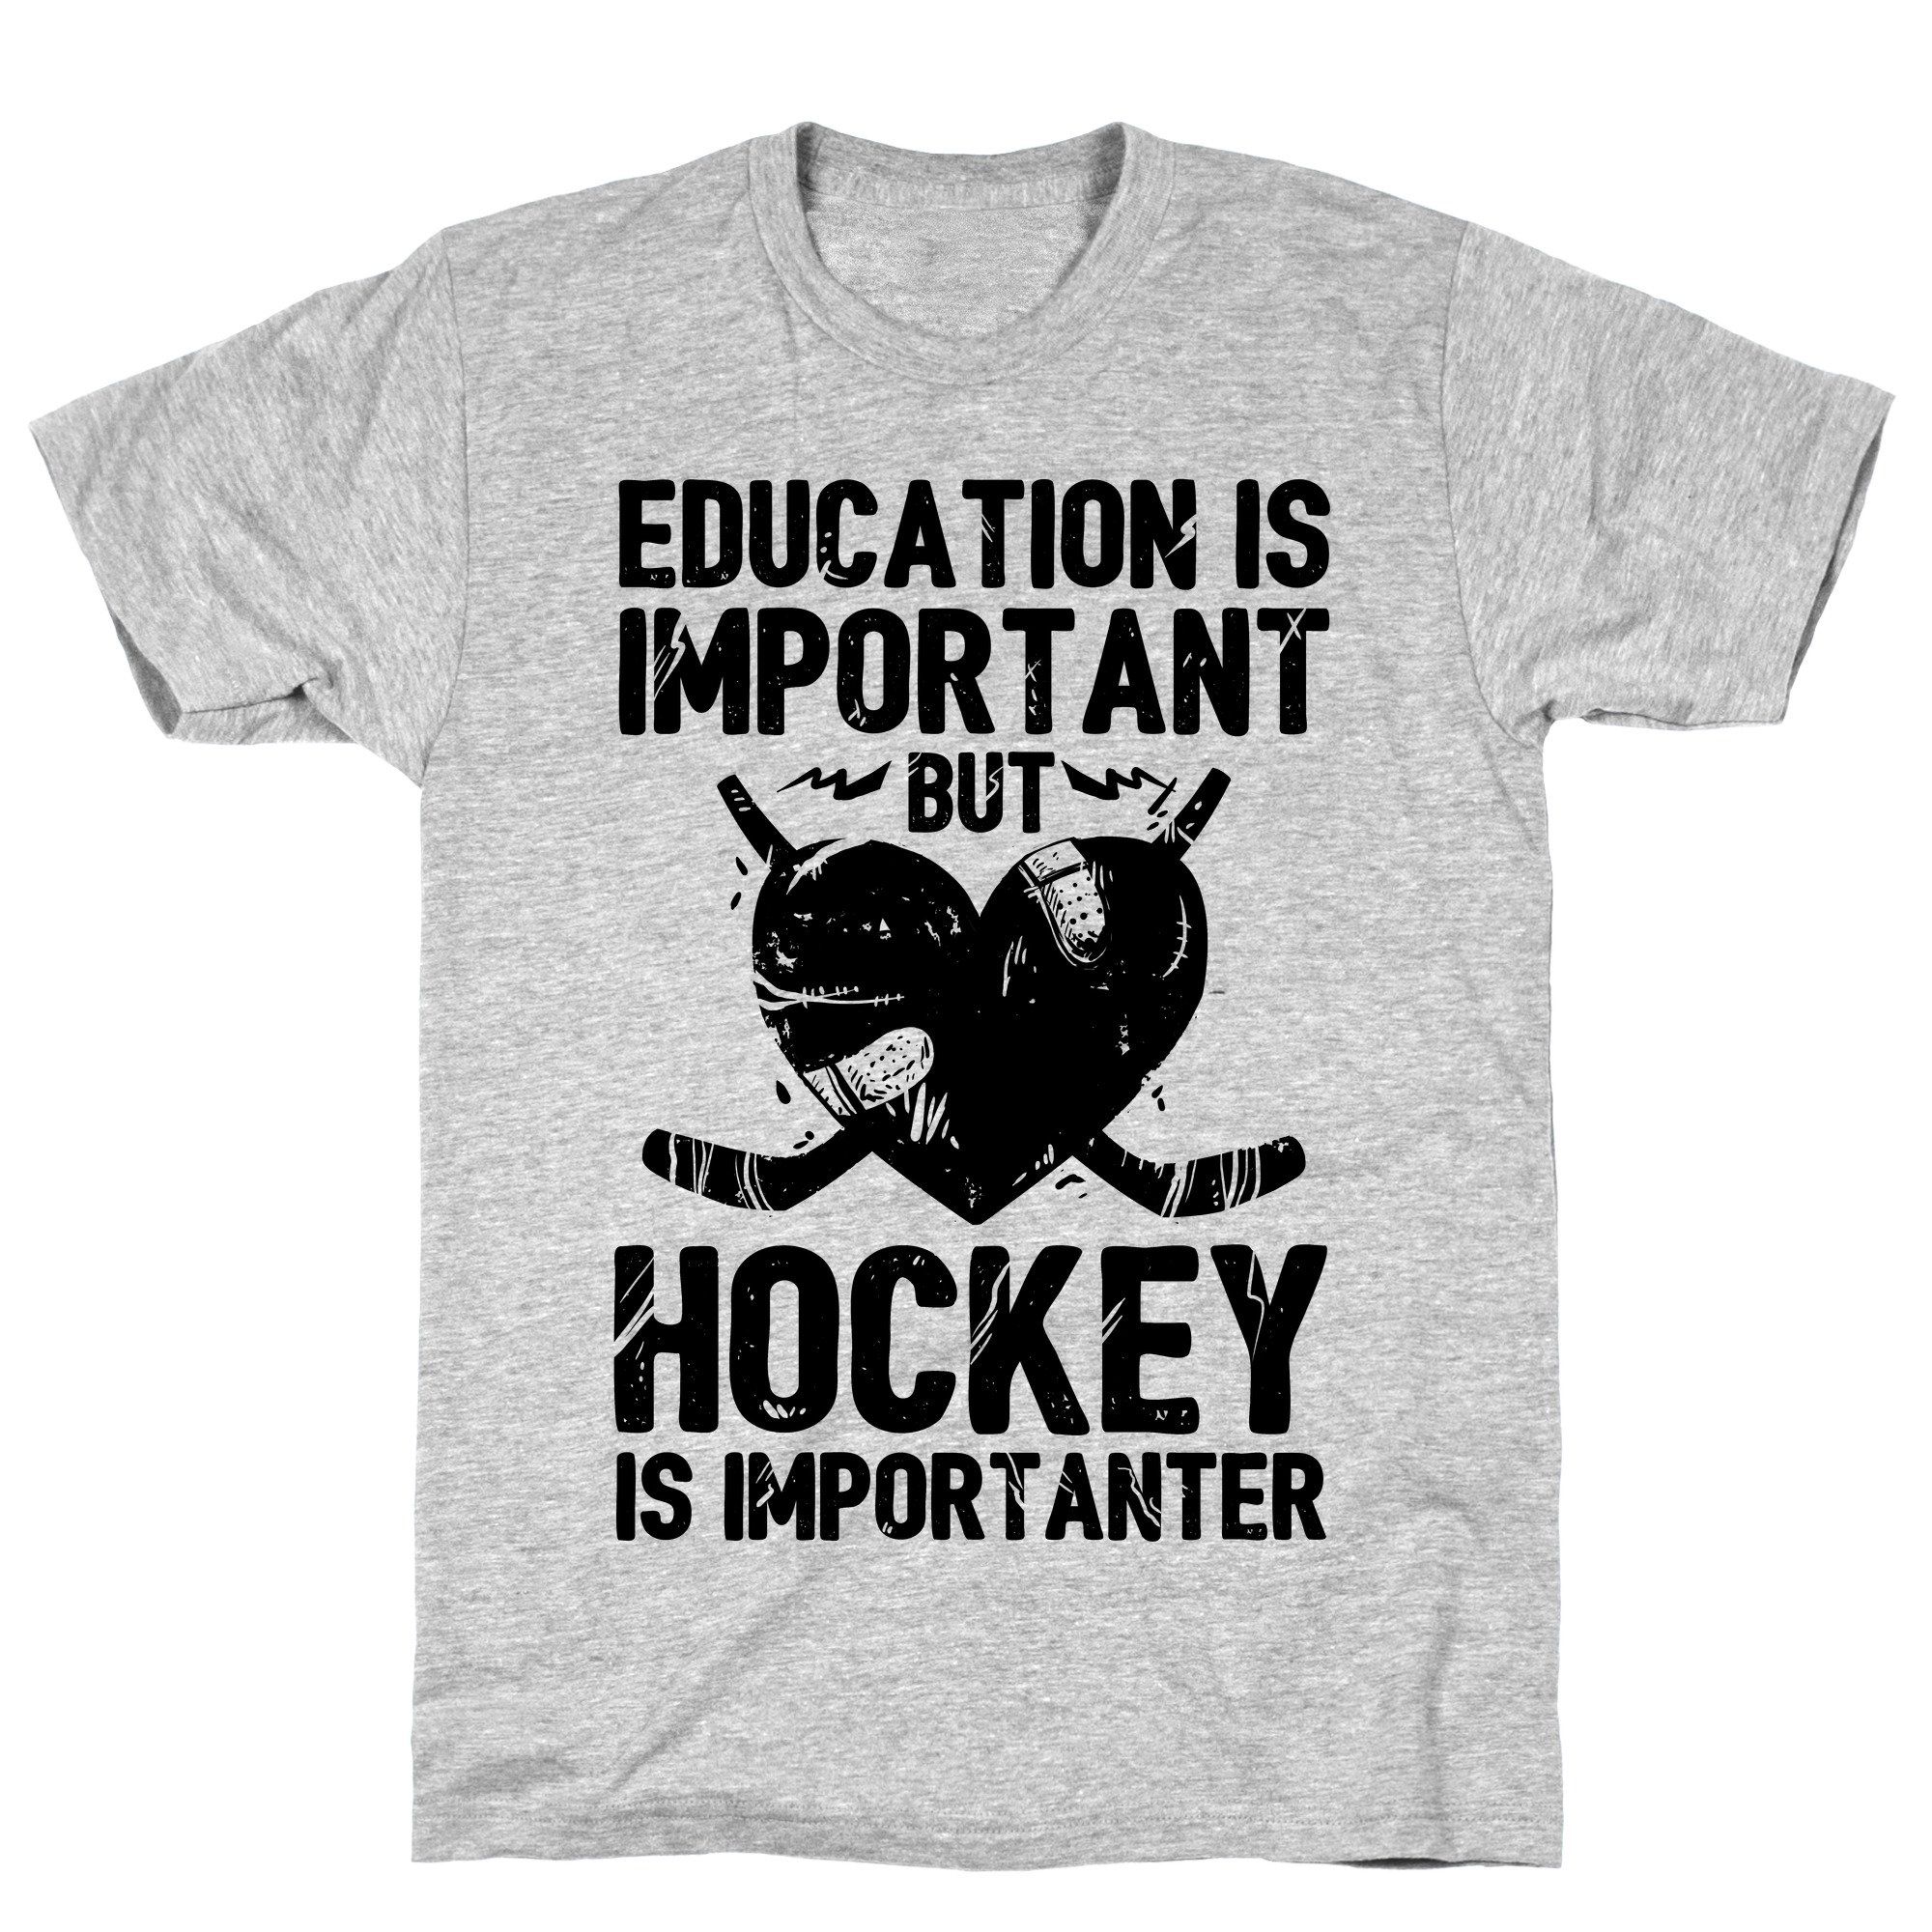 Education is Important But Hockey Is Importanter Athletic Gray Unisex Cotton Tee Shirt – Gray _ Large